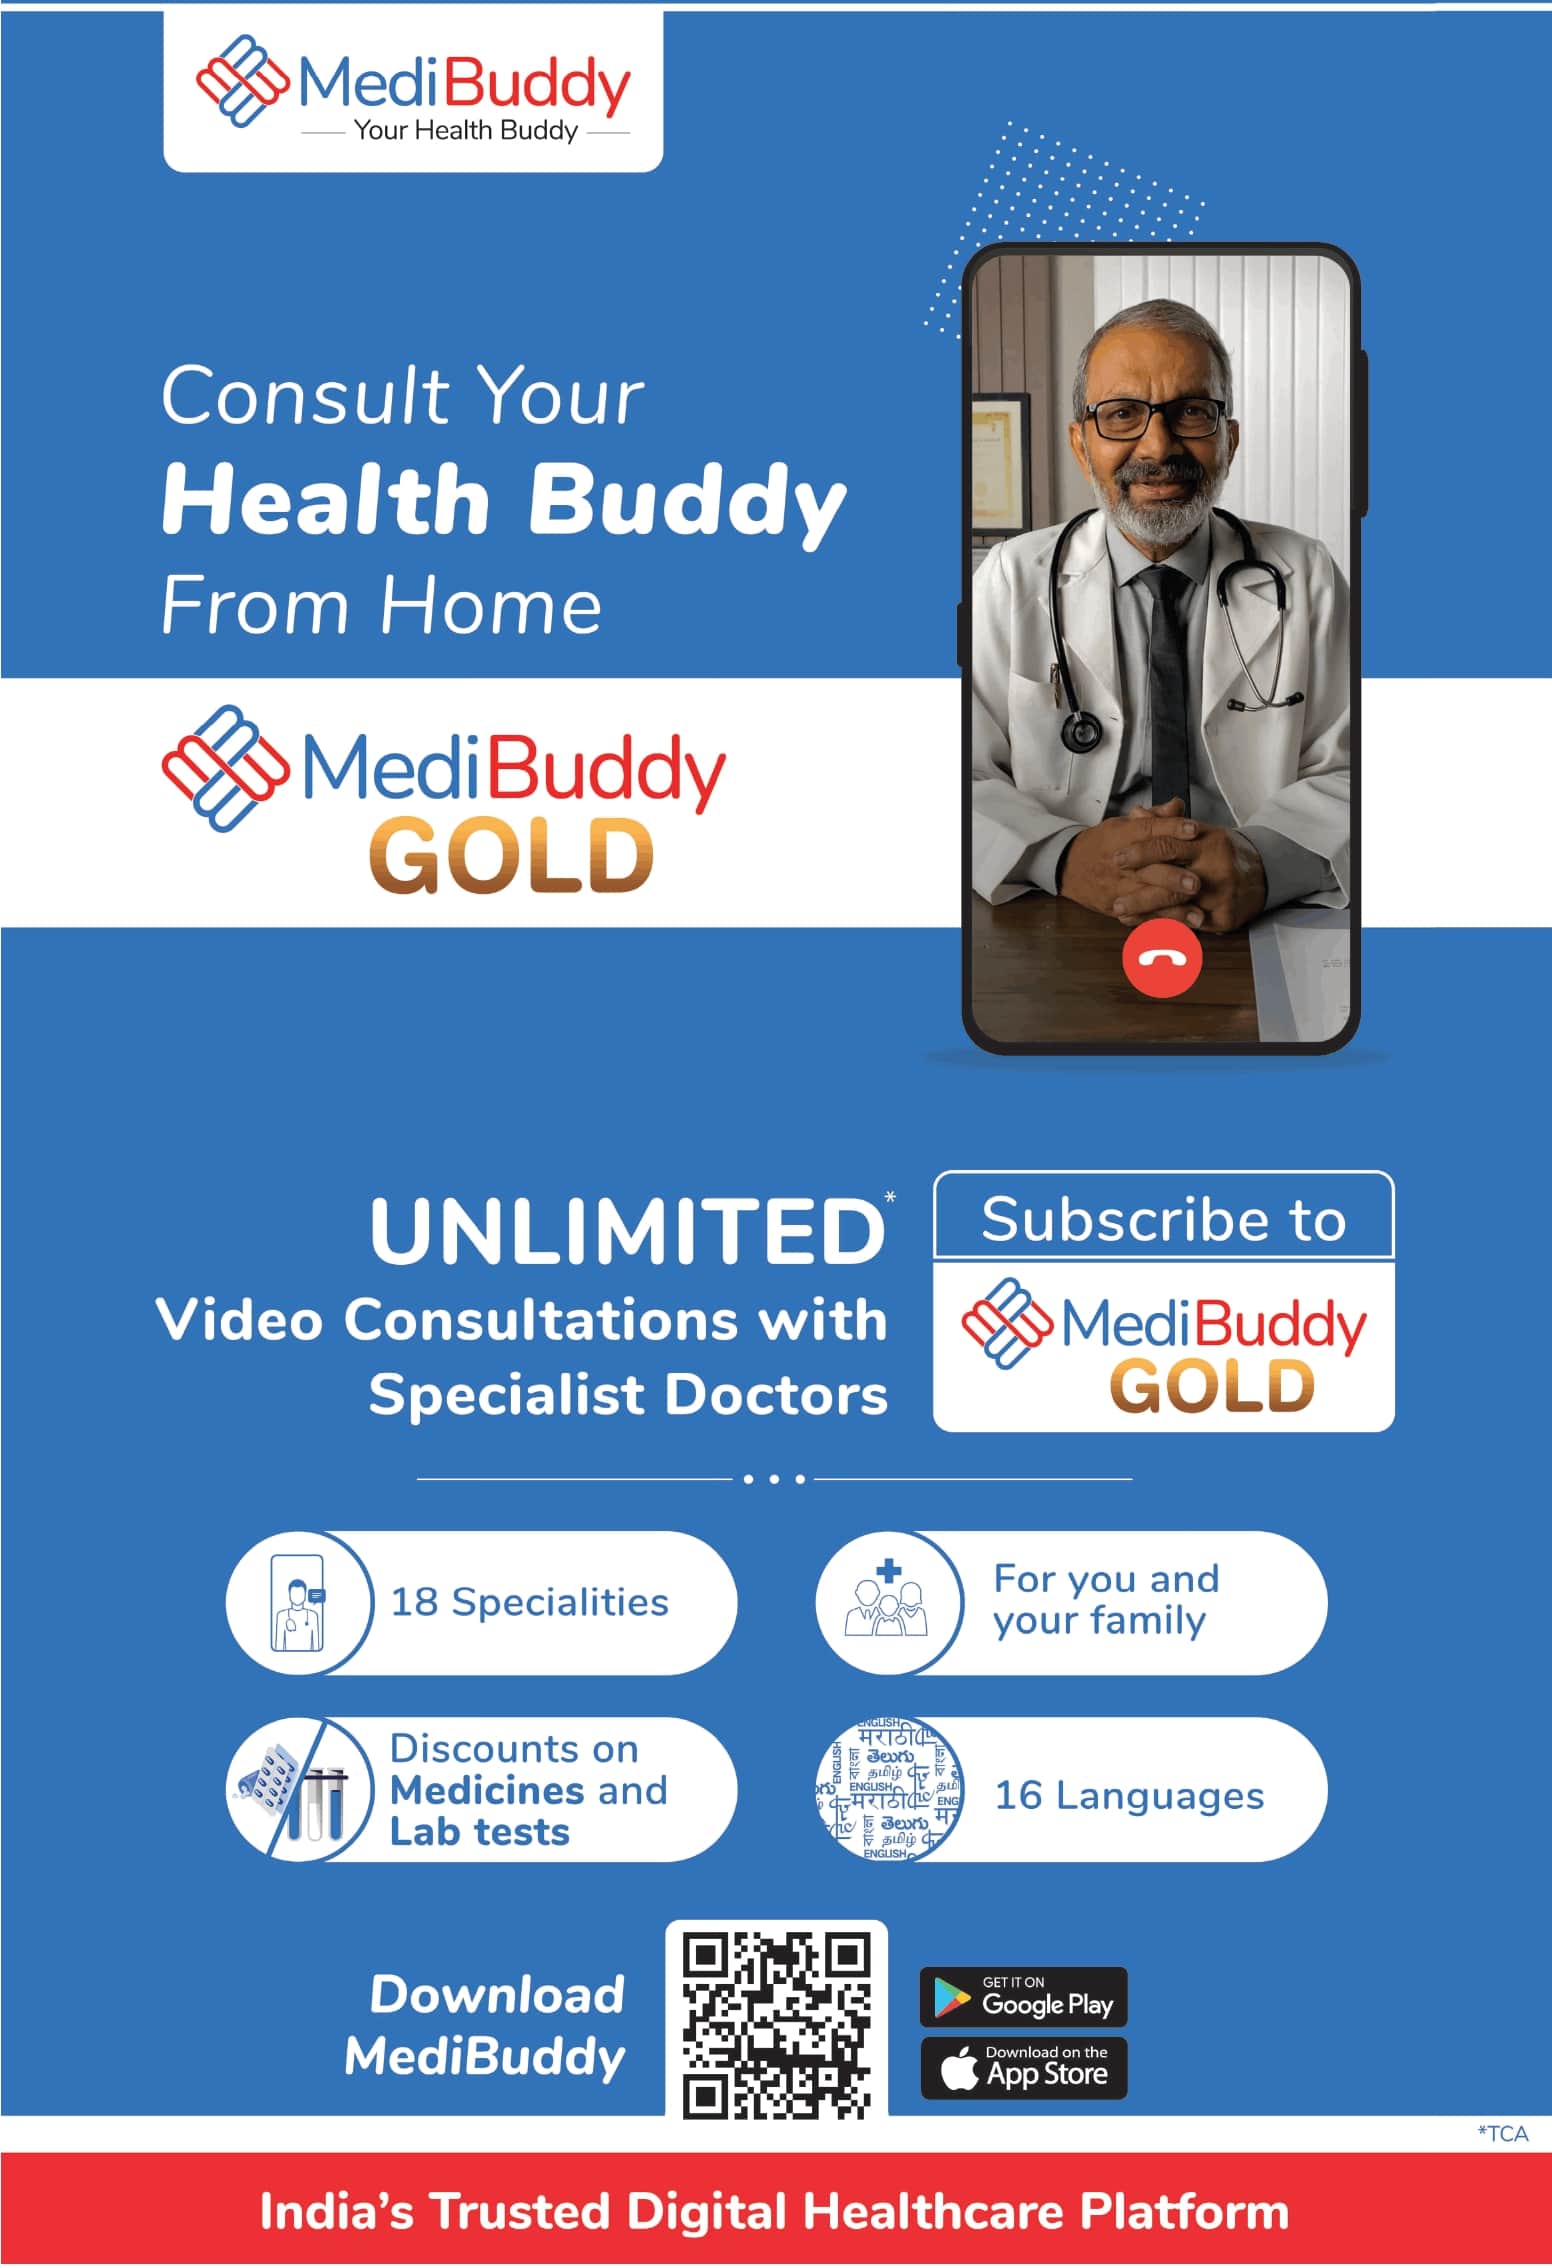 medi-buddy-consult-your-health-buddy-from-home-ad-times-of-india-delhi-28-05-2021